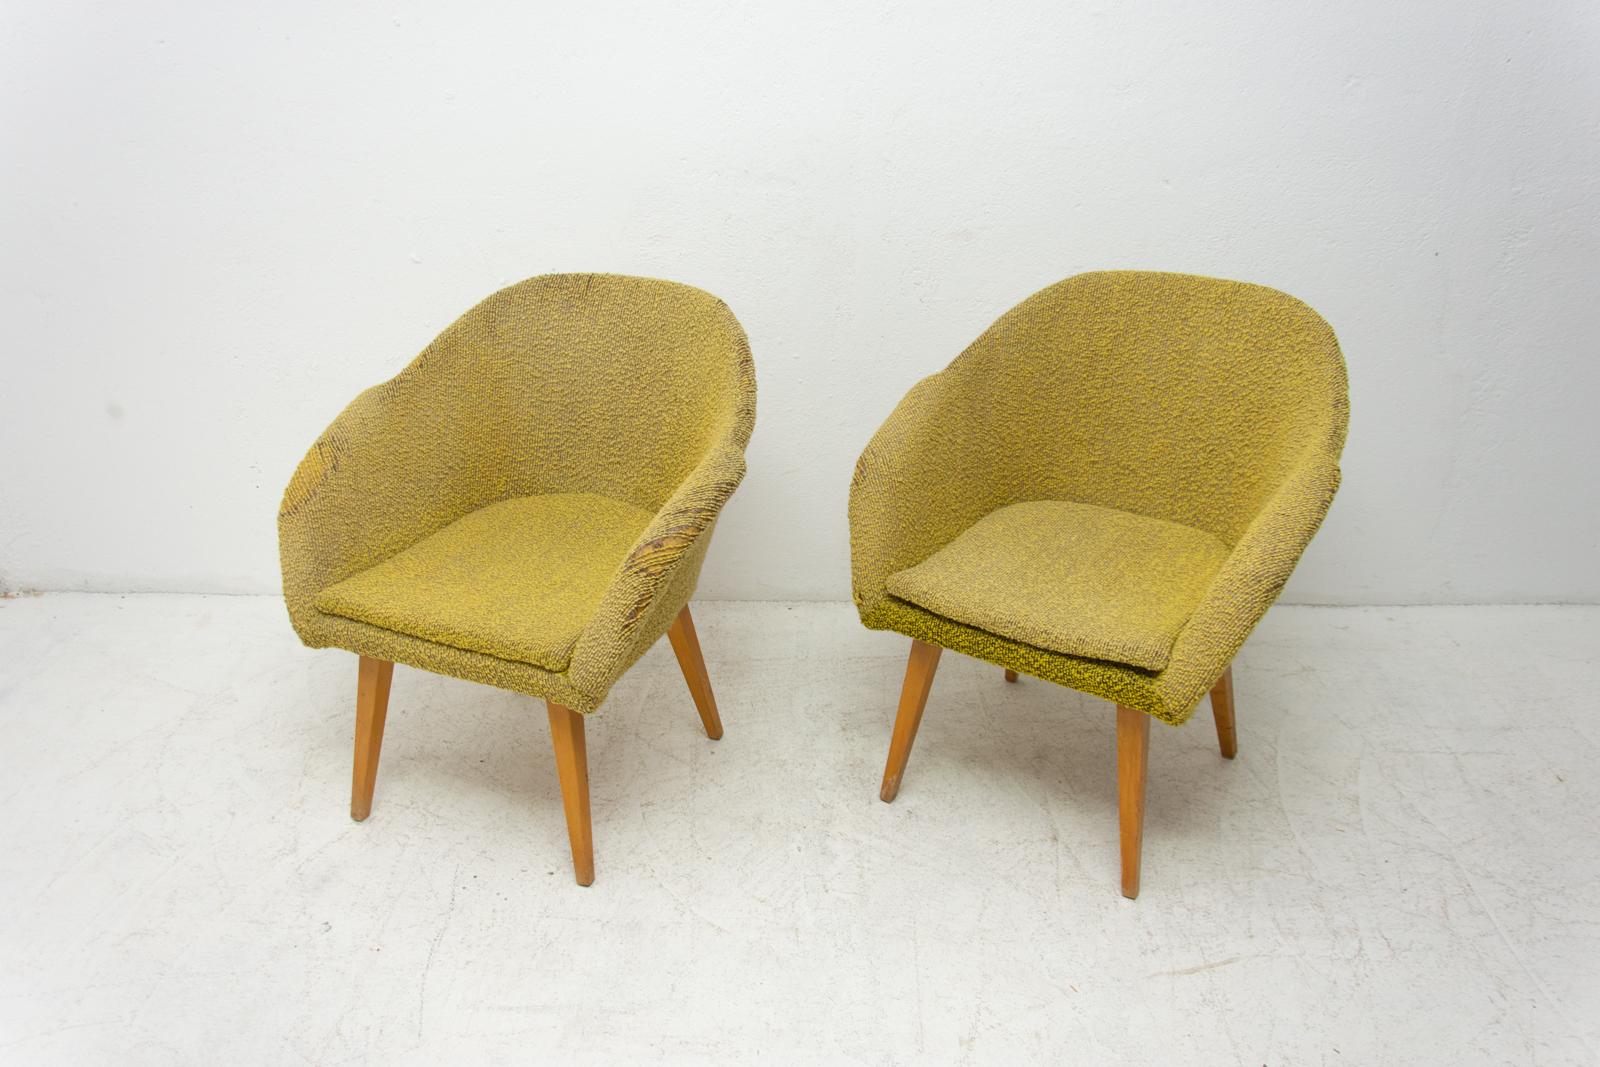 20th Century Pair of Midcentury Shell Fiberglass Lounge Chairs, Czechoslovakia, 1960s For Sale